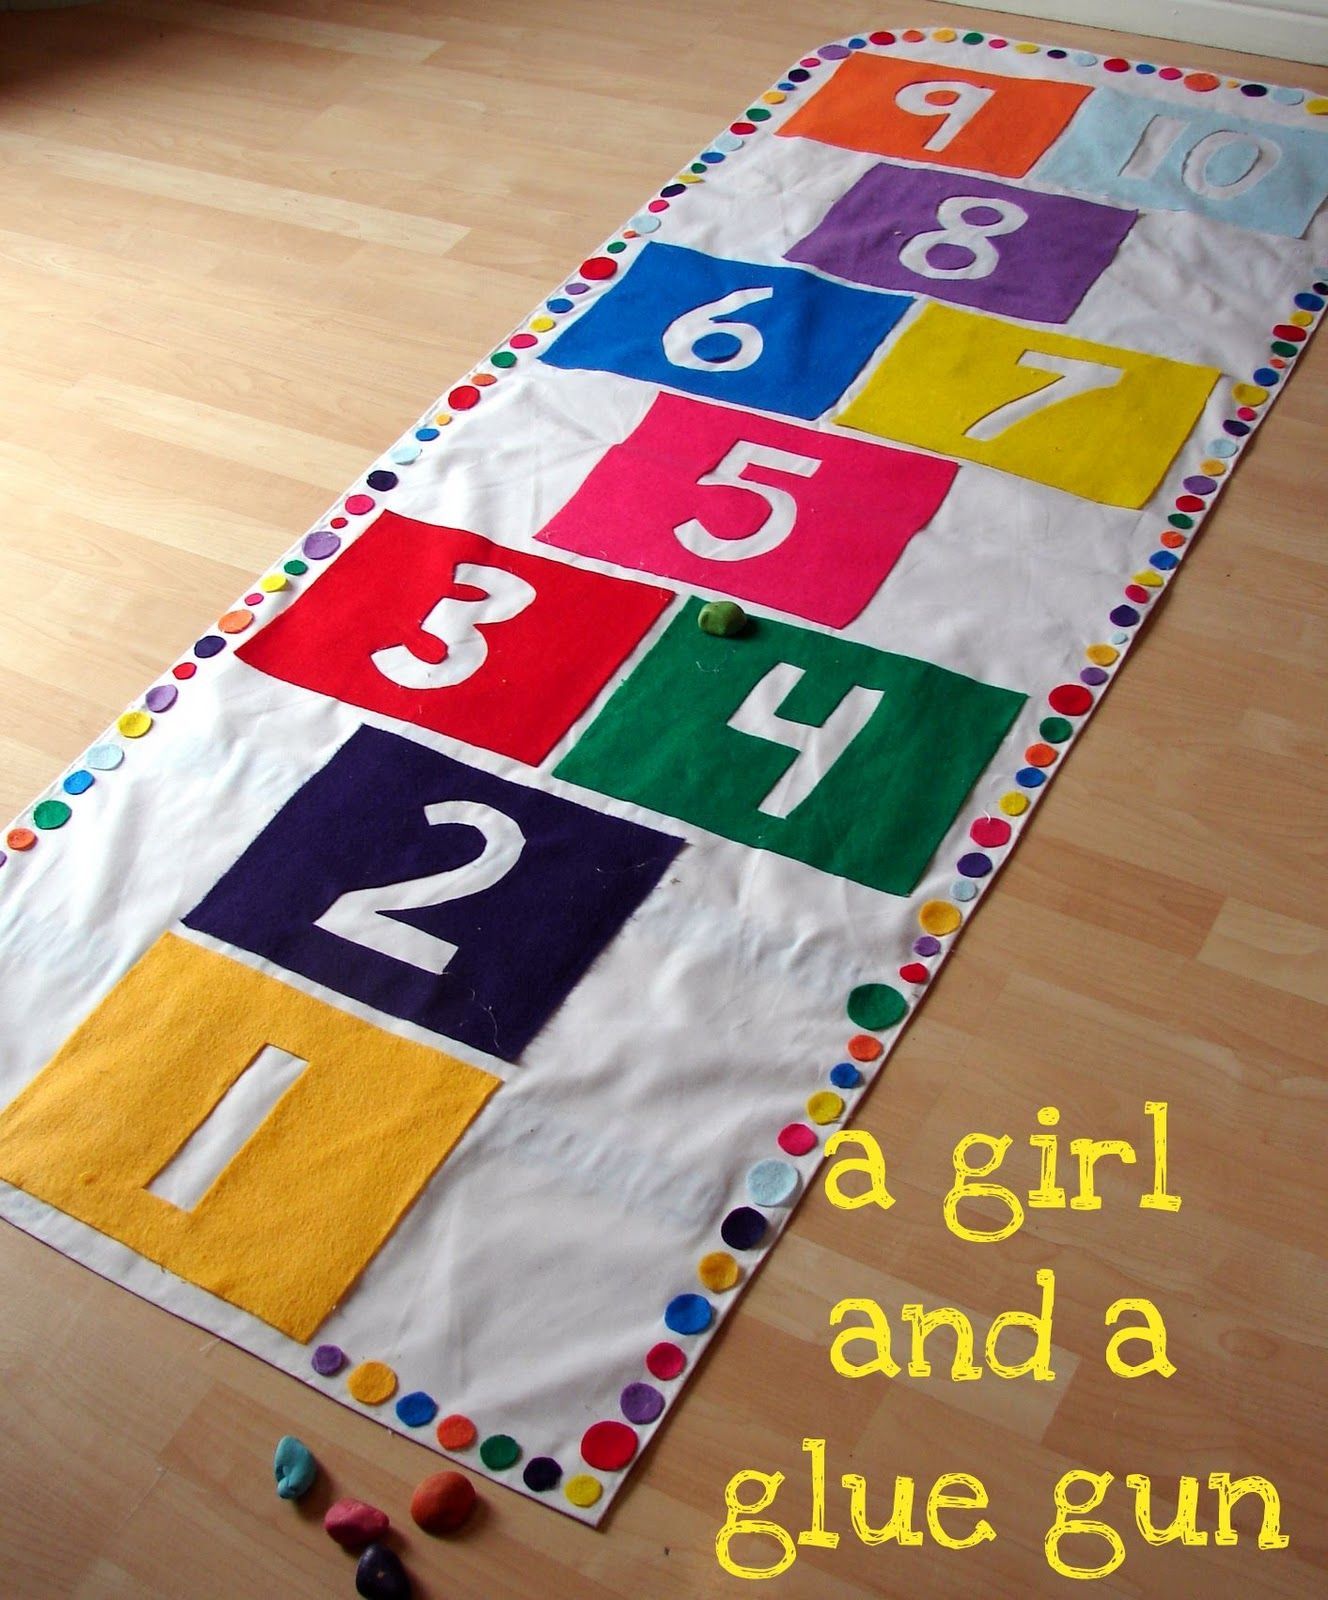 Easy craft!  Felt hopscotch/tic tac toe/target game that folds up into a small bundle-perfect for a rainy day.